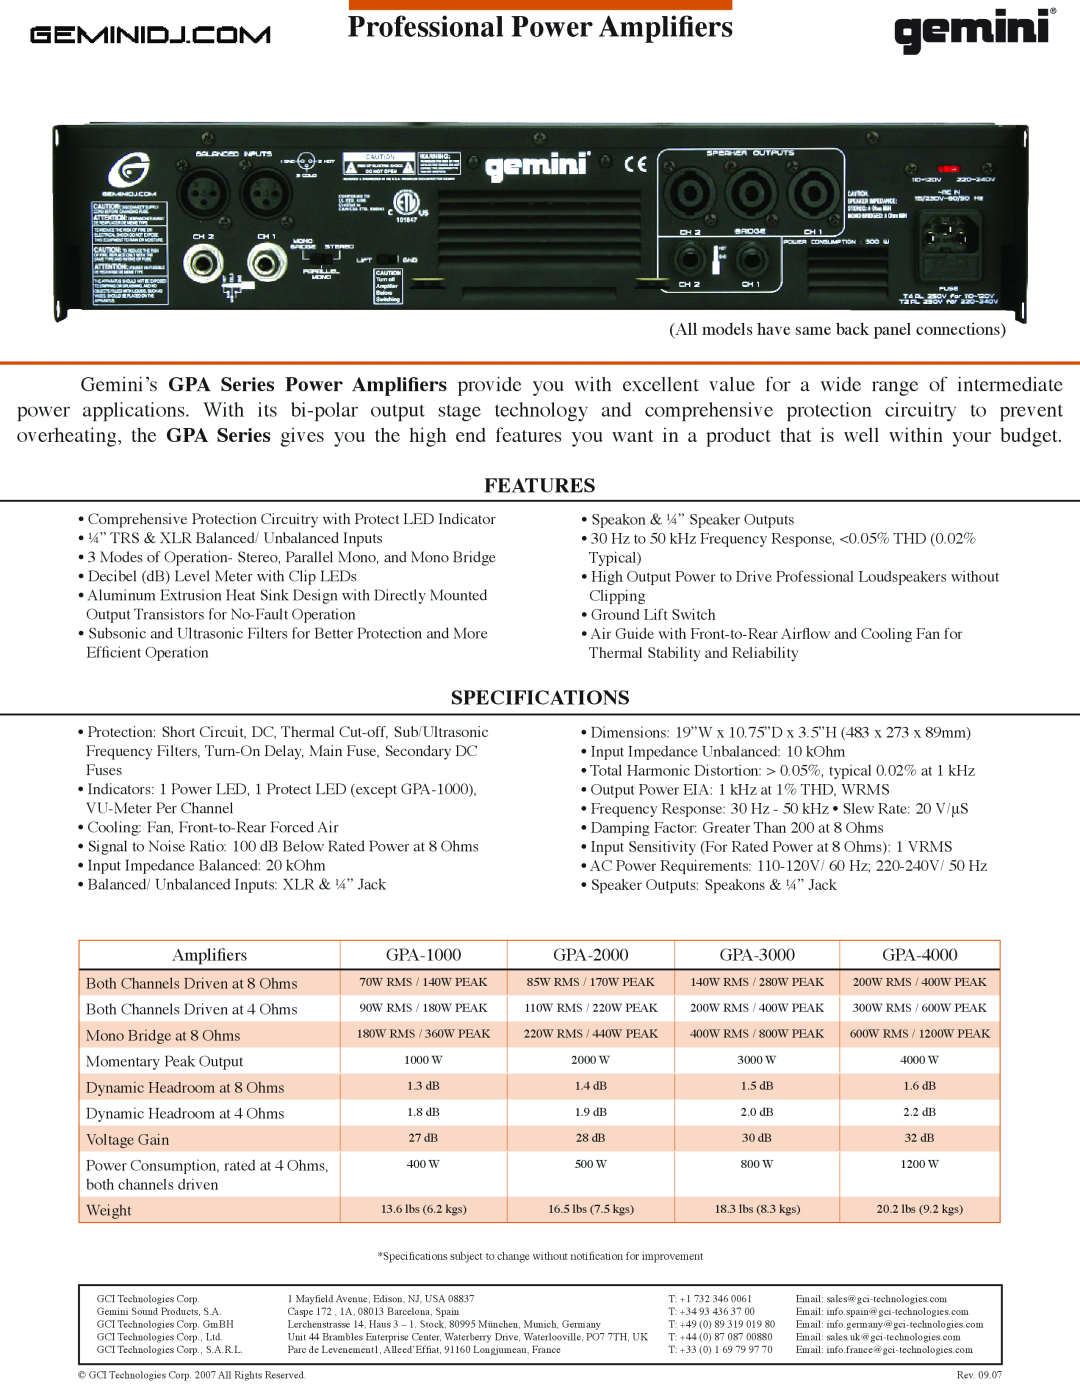 Gemini GPA-2000 manual Professional Power Amplifiers, Features, Specifications, All models have same back panel connections 